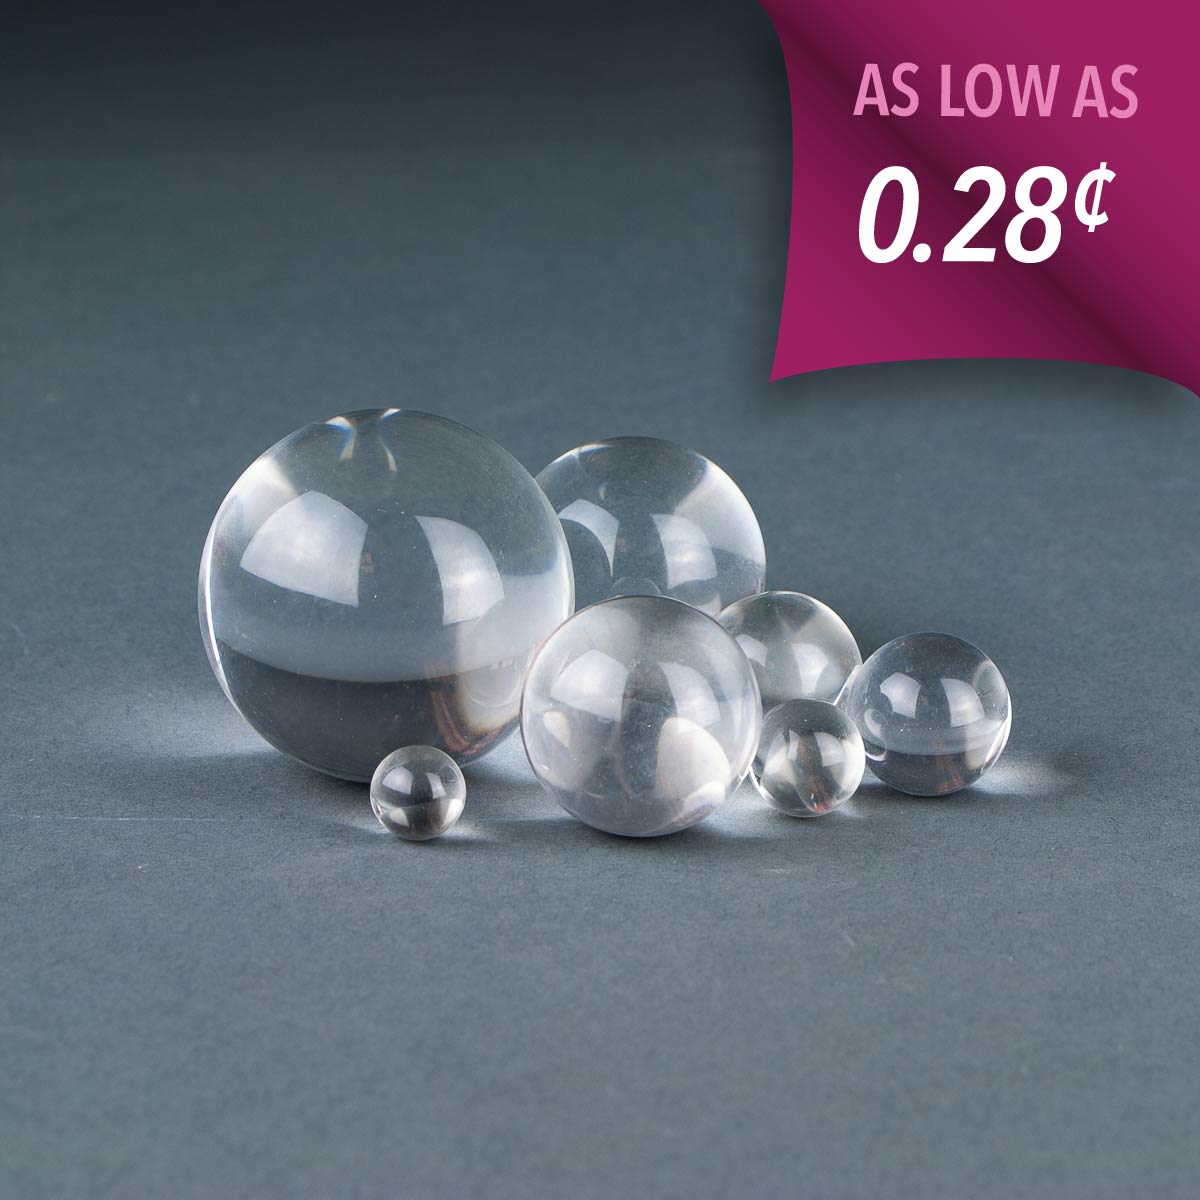 Clear acrylic spheres available in various diameters